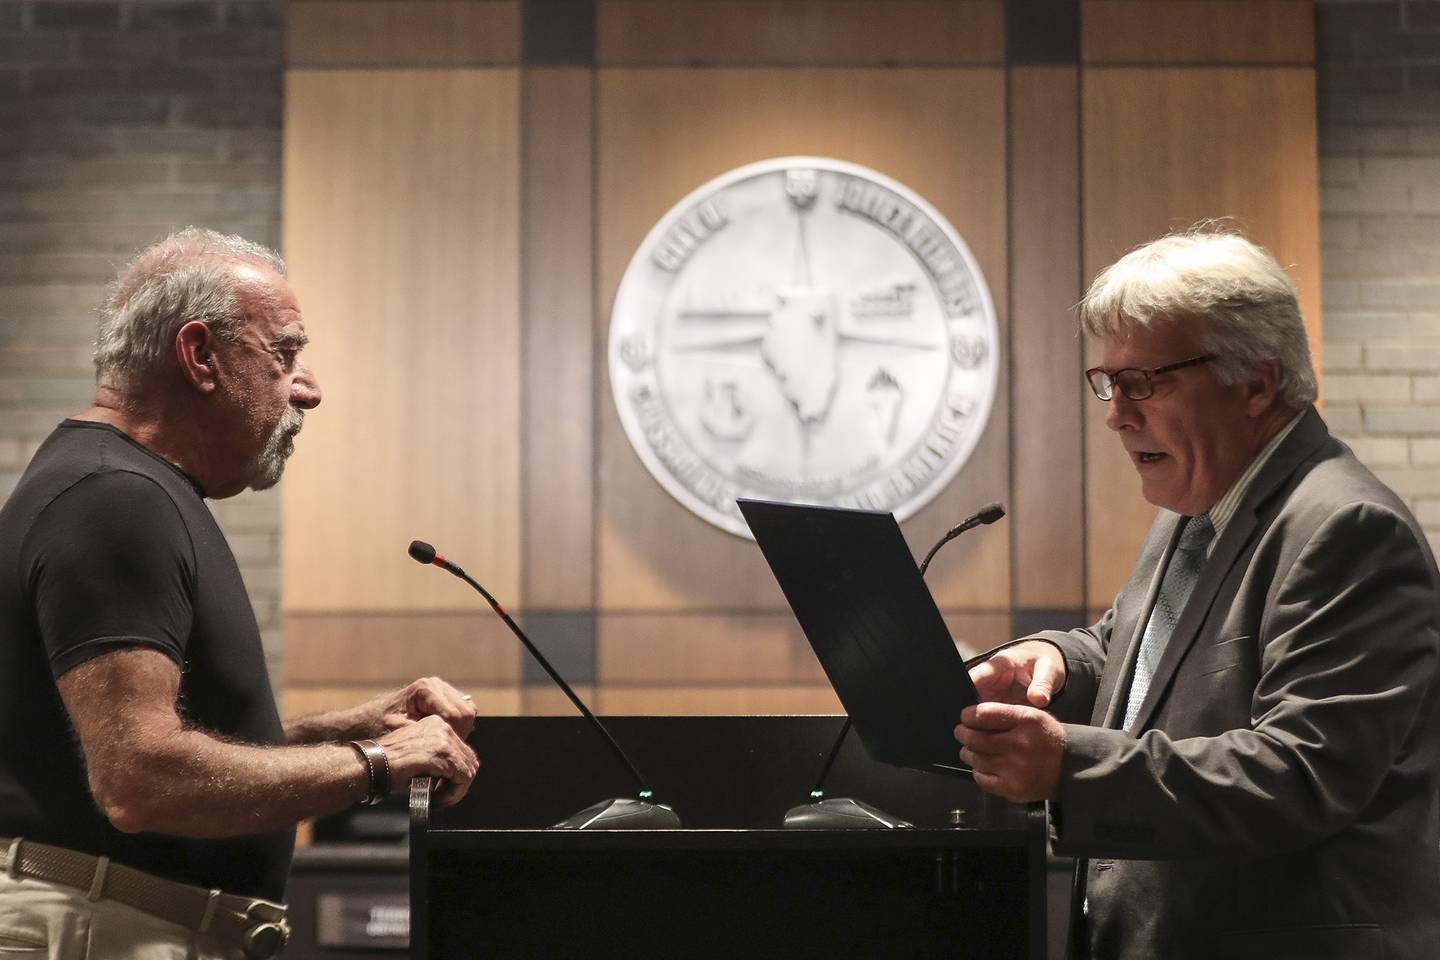 Councilman Larry Hug (right) reads a proclamation honoring Herb Lande (left) as he leaves the city council on Monday, May 3, 2021, at Joliet City Hall in Joliet, Ill. After a tight race, three new City Councilman were sworn in at a special meeting on Tuesday.